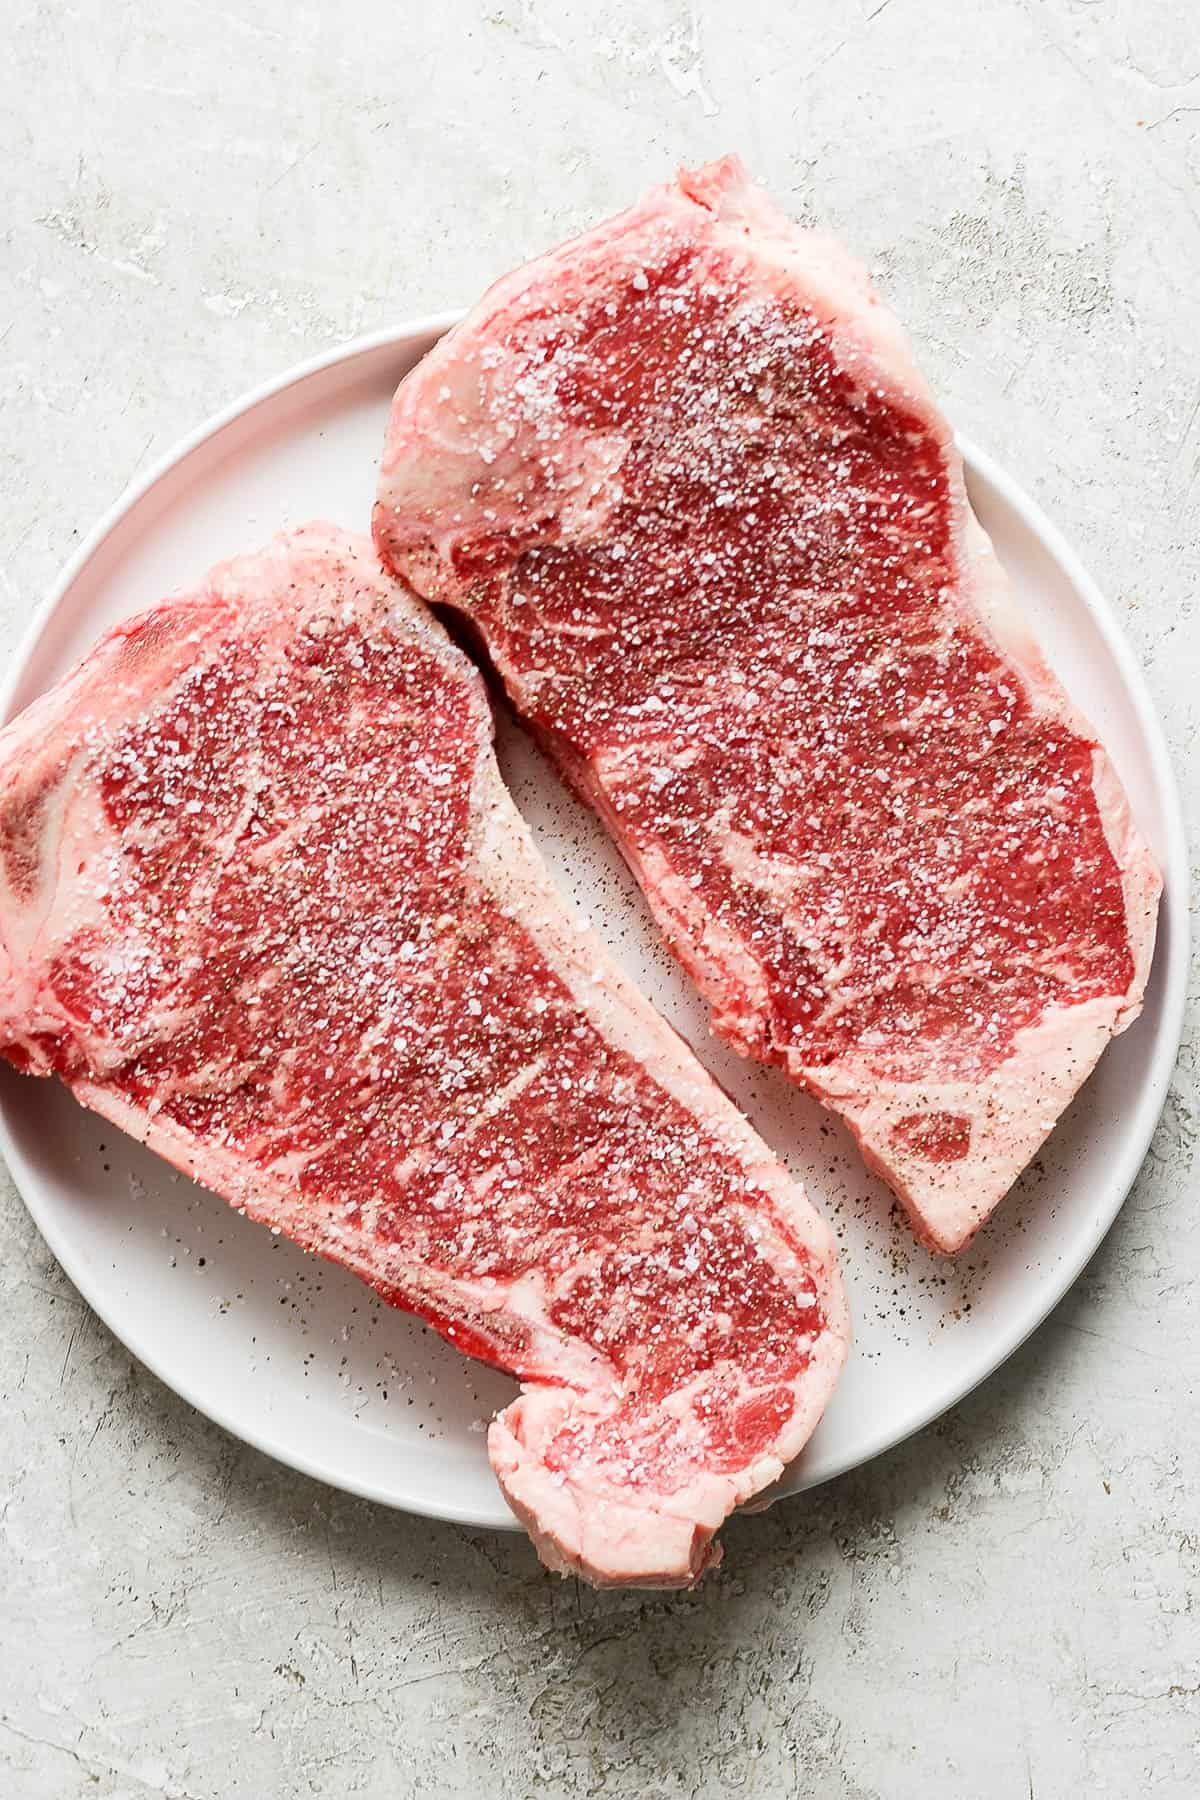 Raw steaks seasoned with salt and pepper on a white plate.